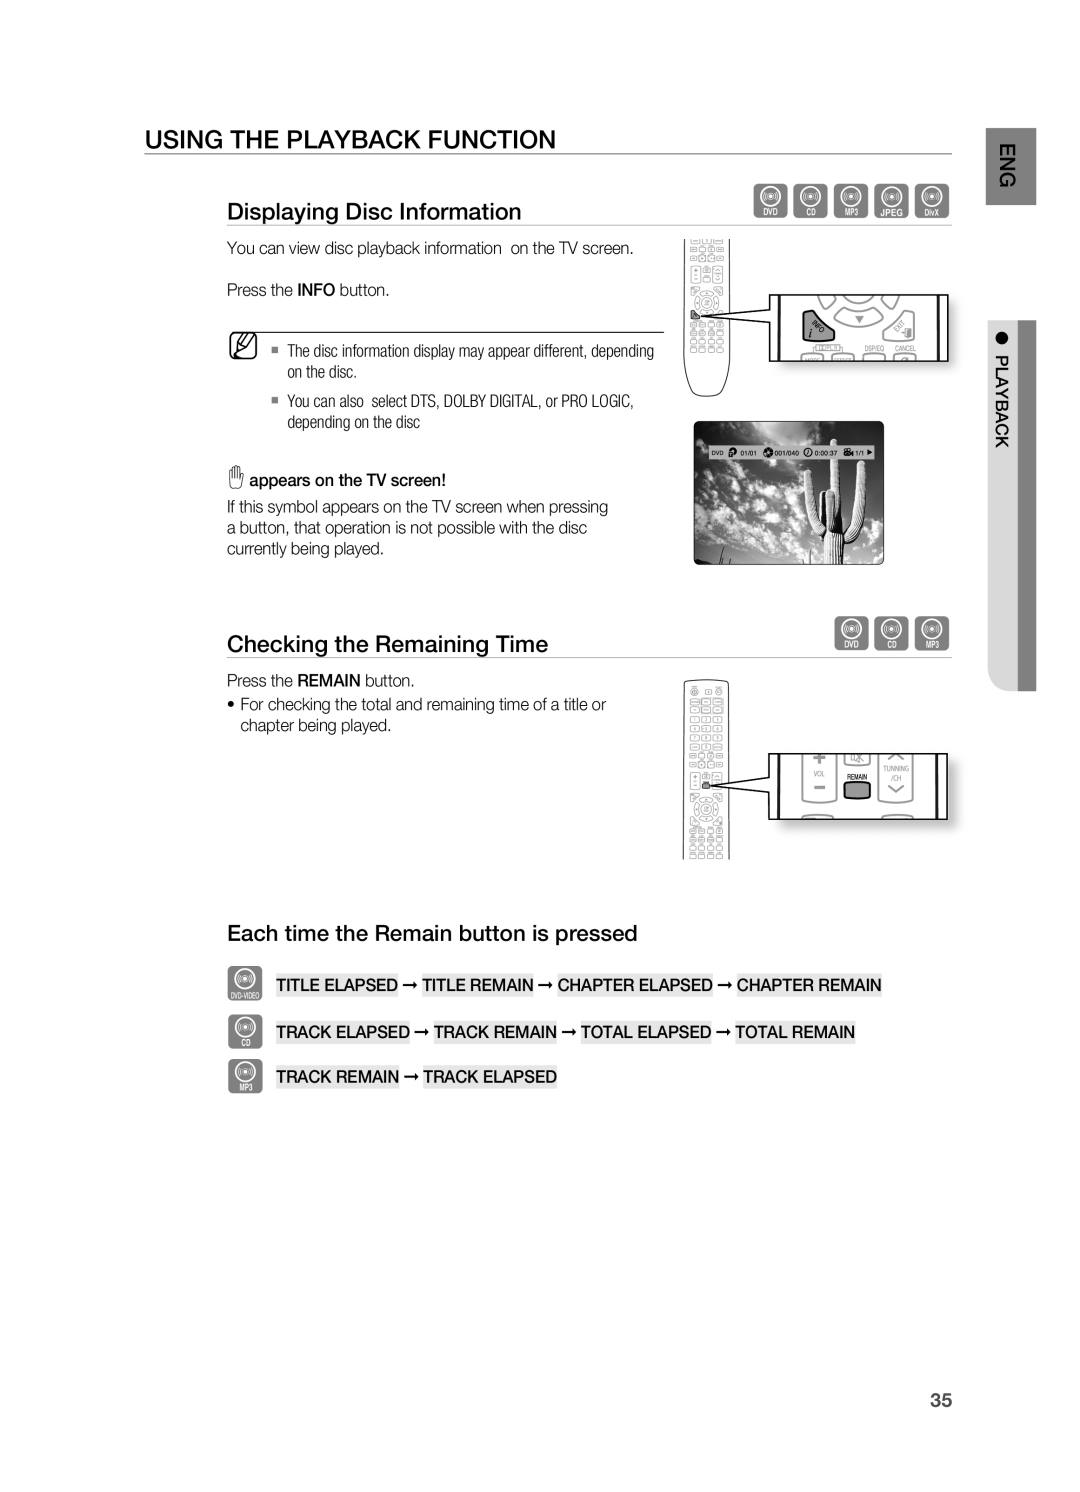 Samsung HT-X725G, HT-TX725G user manual Bagd, Using The Playback Function, Each time the remain button is pressed 